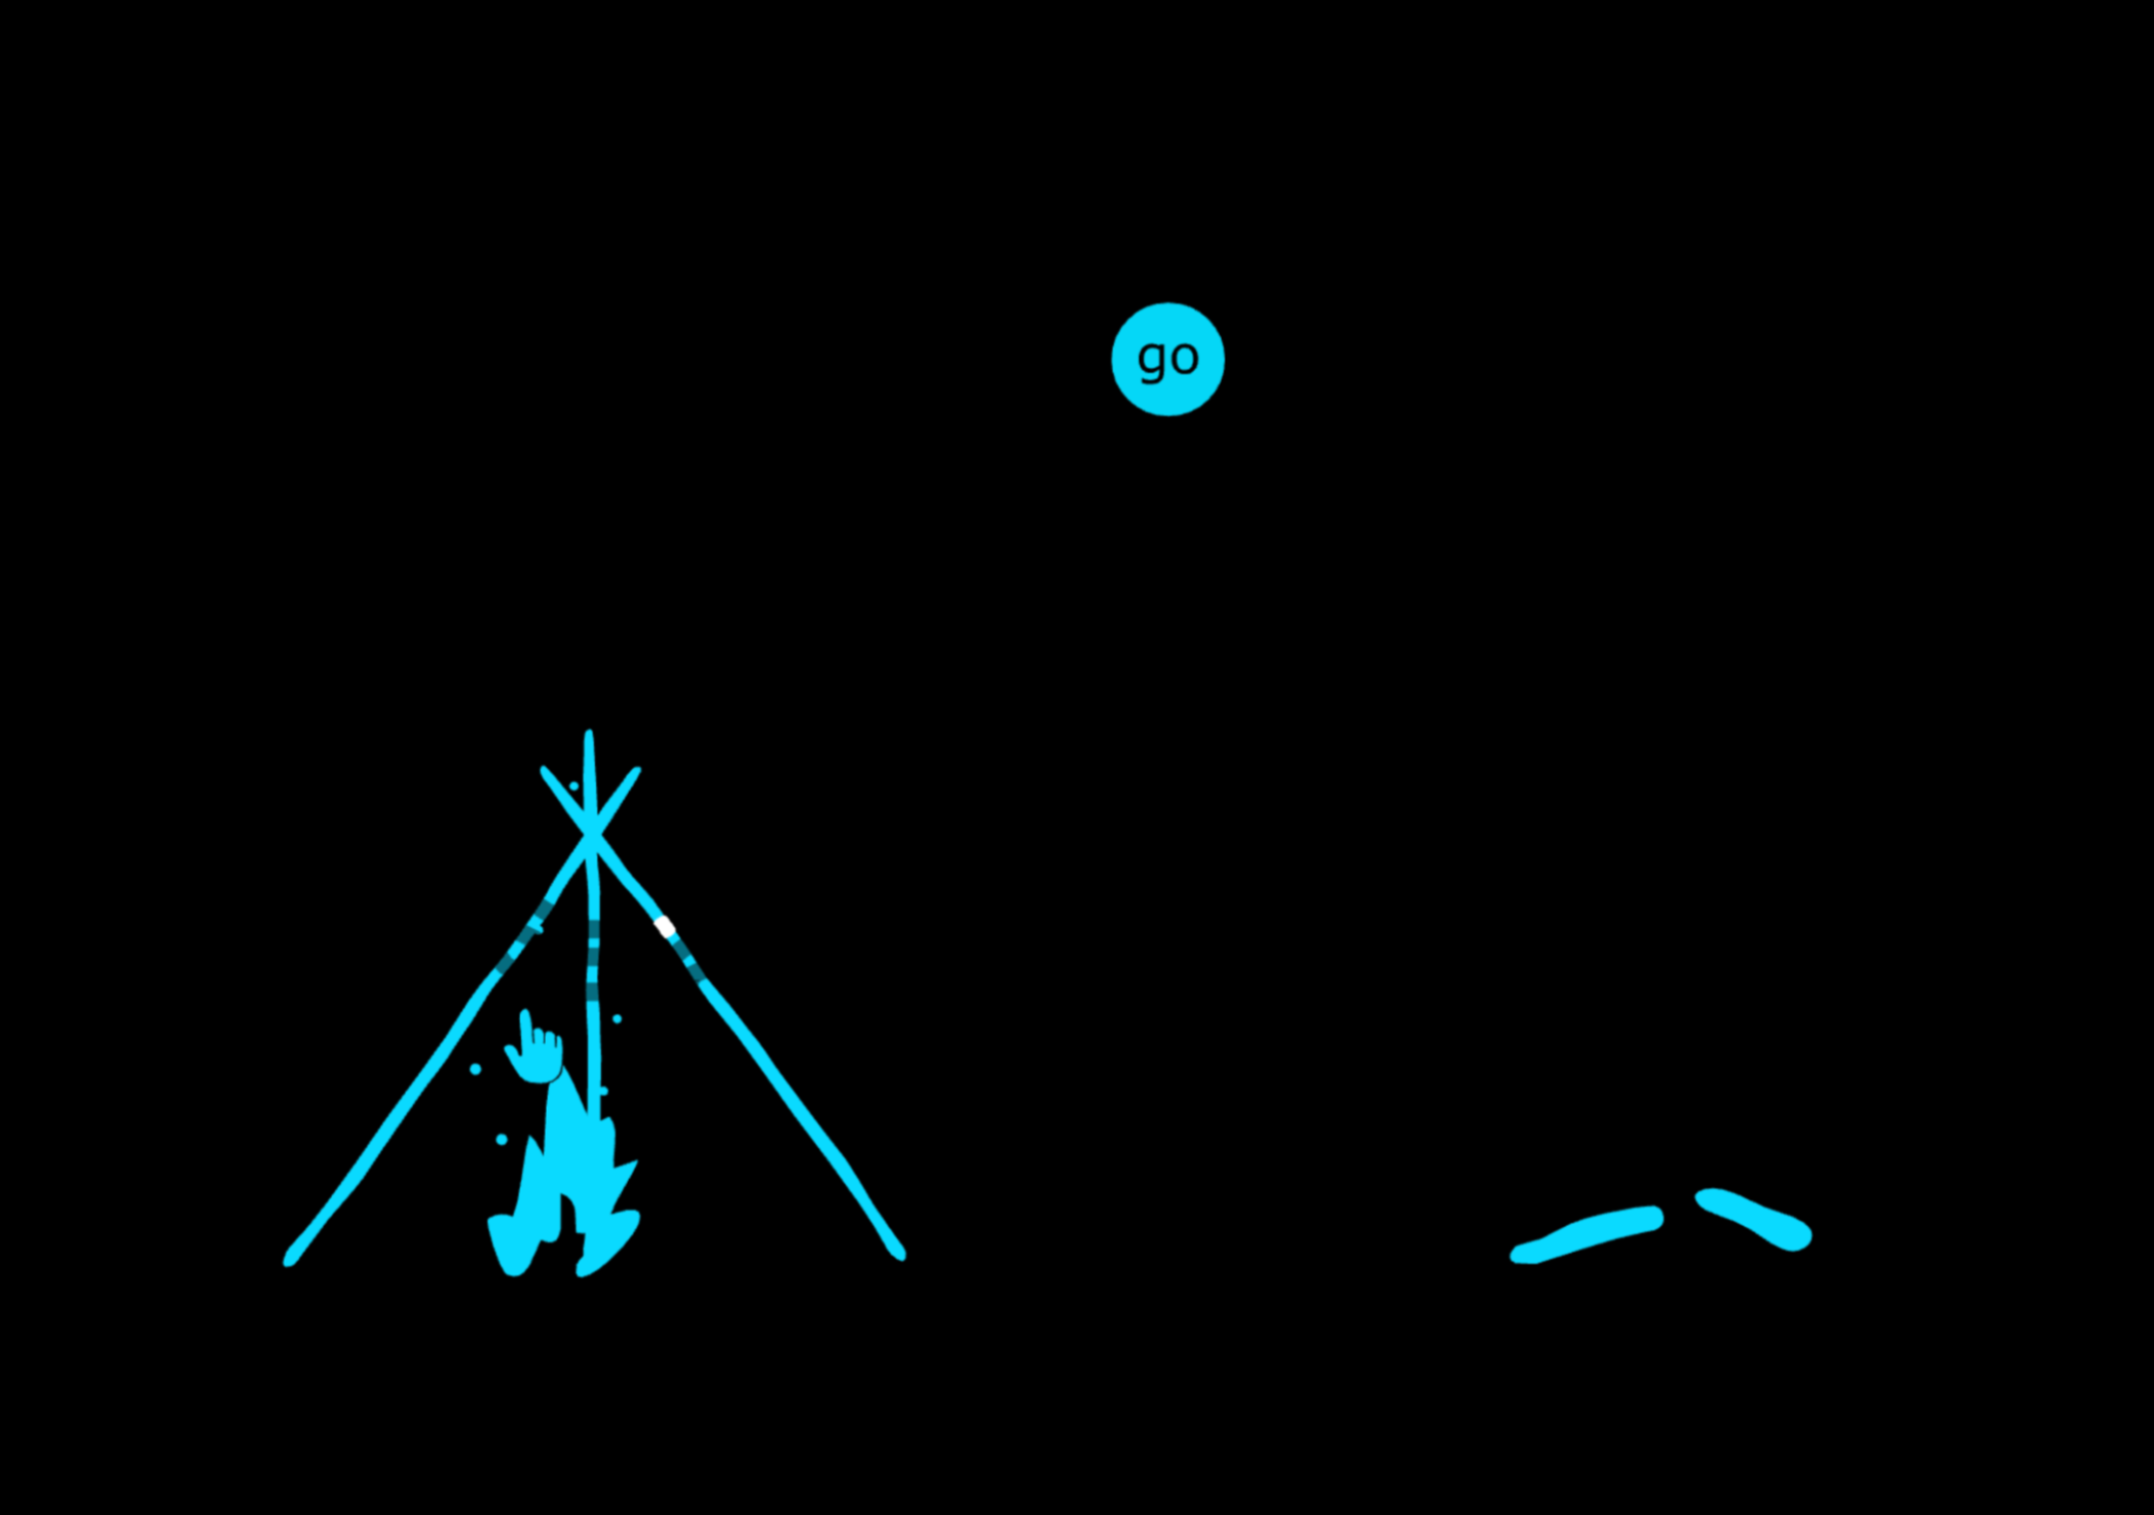 Outline of campfire and tipi on black background with the sun in the sky having "go" written inside